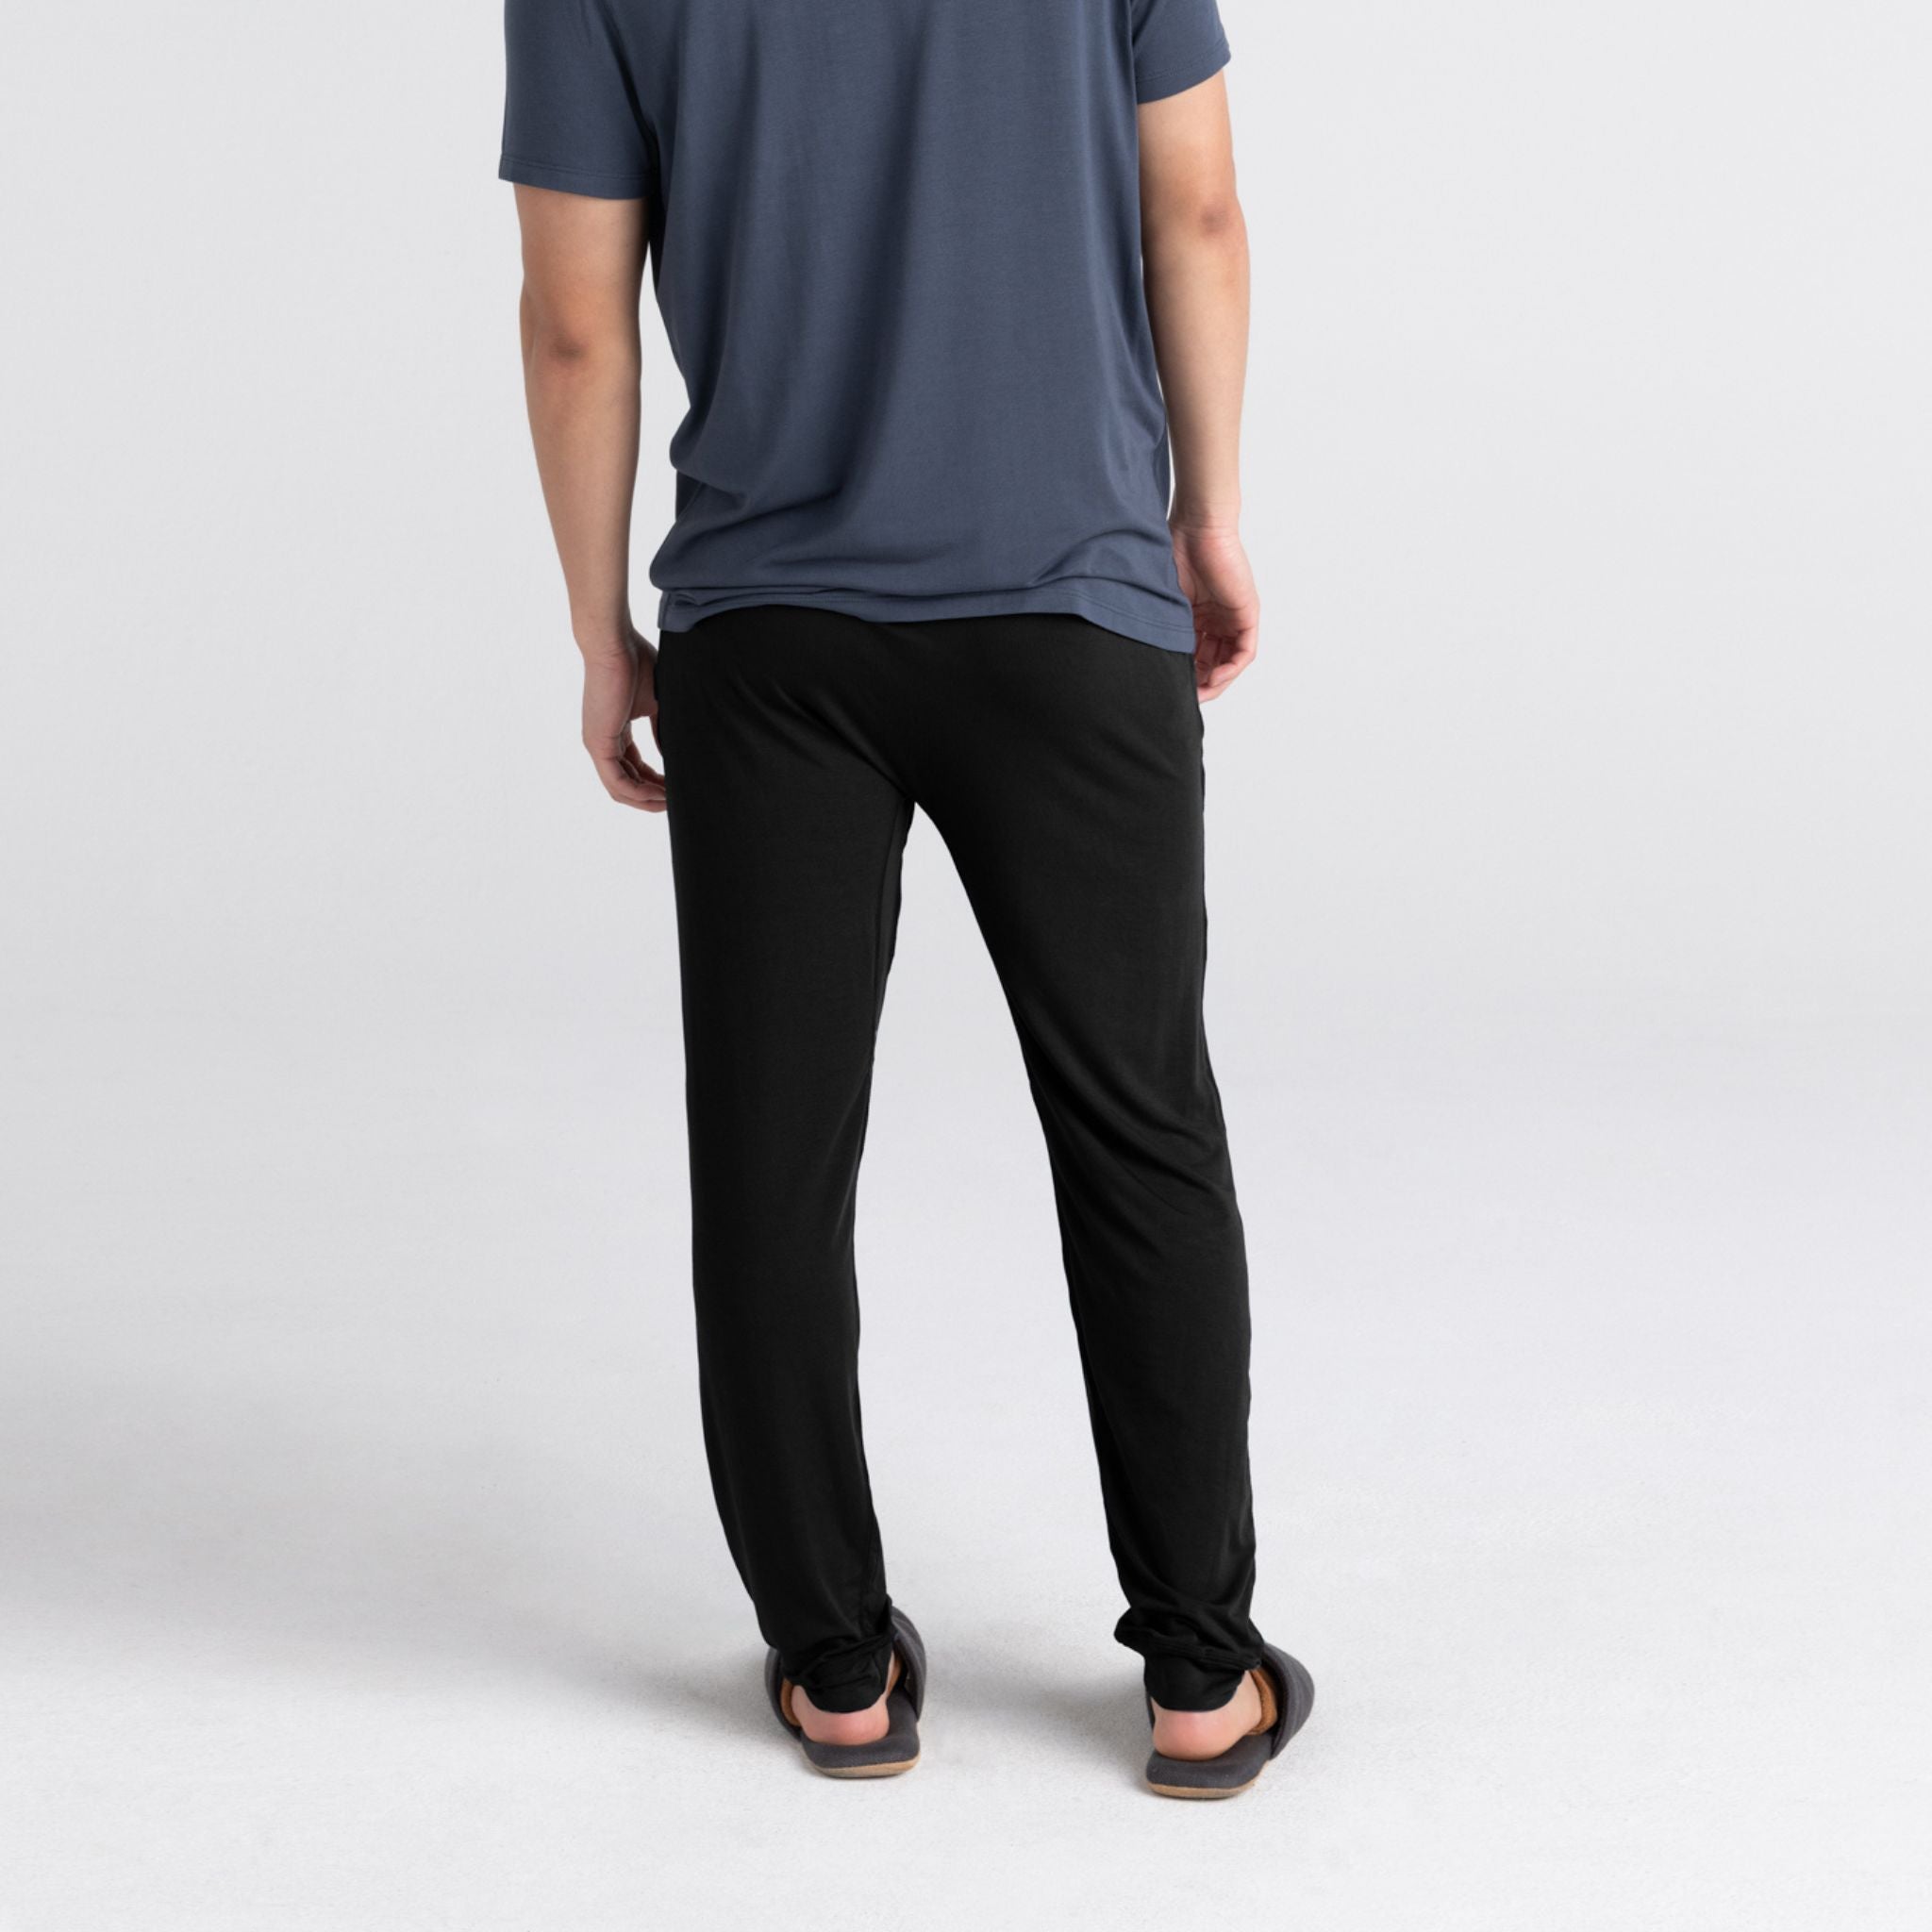 Made from buttery-soft Modal and featuring Flat Out Seams™ for chafe-free comfort, SAXX's Snooze Pant is designed to feel better than sleeping in your birthday suit. With a jogger cut and tapered leg, this pant is perfect to hang out at home in or when you want to up your comfort level. 